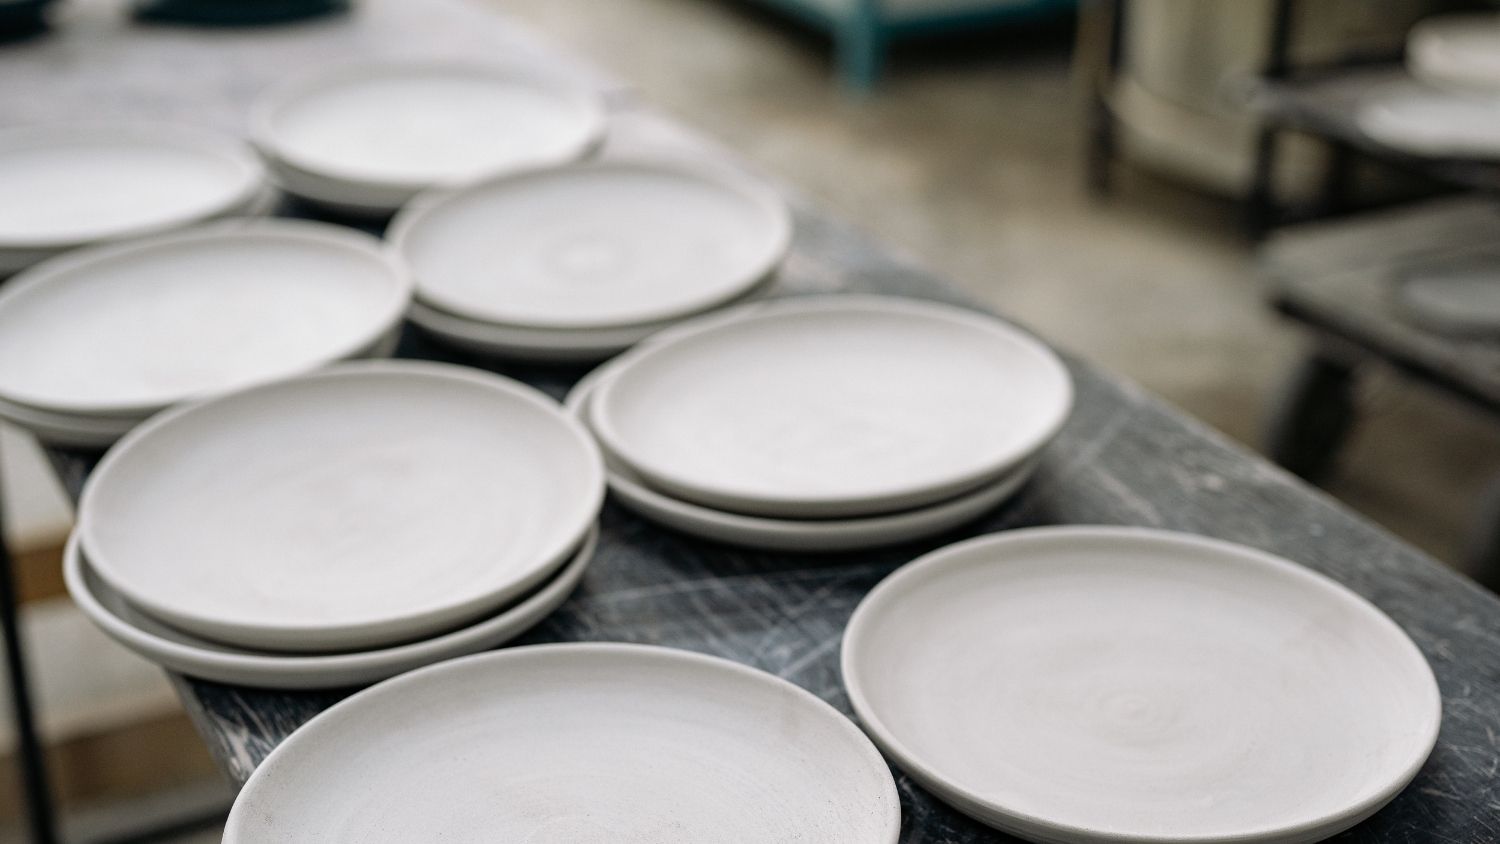 White plates stacked on a table